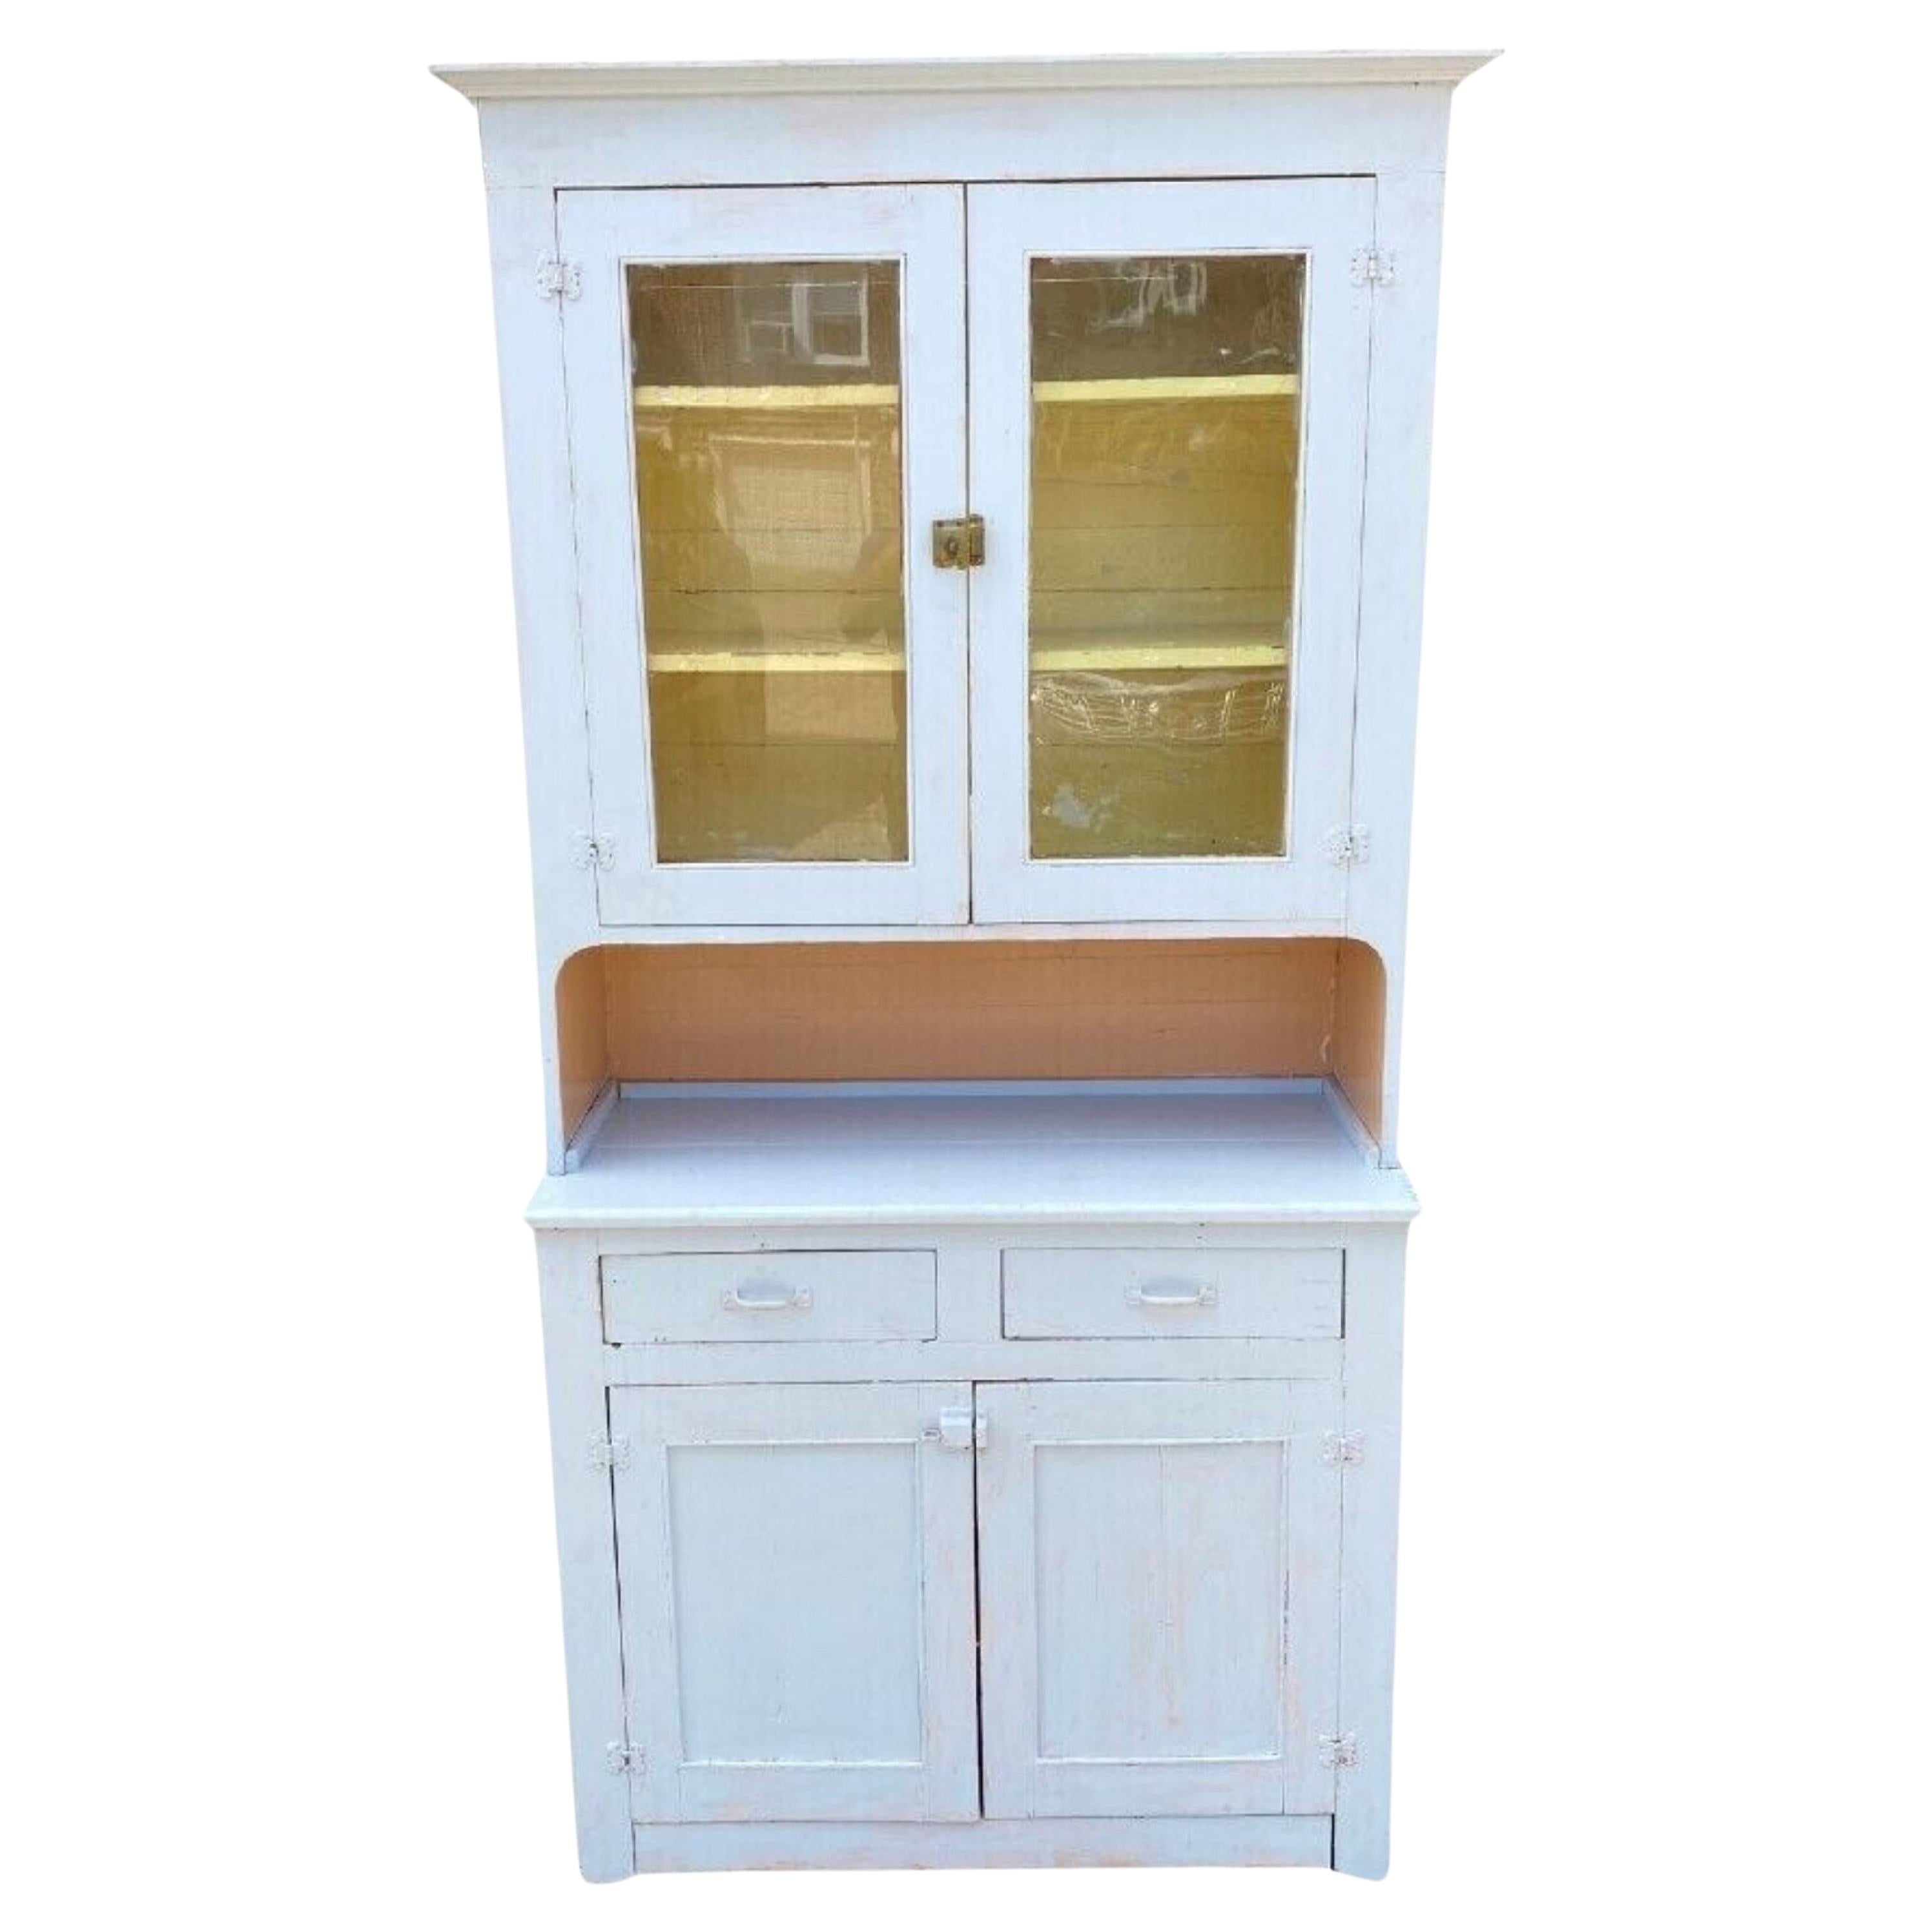 Antique Country Farmhouse White Painted 2 Piece Step Back Hutch Kitchen Cupboard For Sale